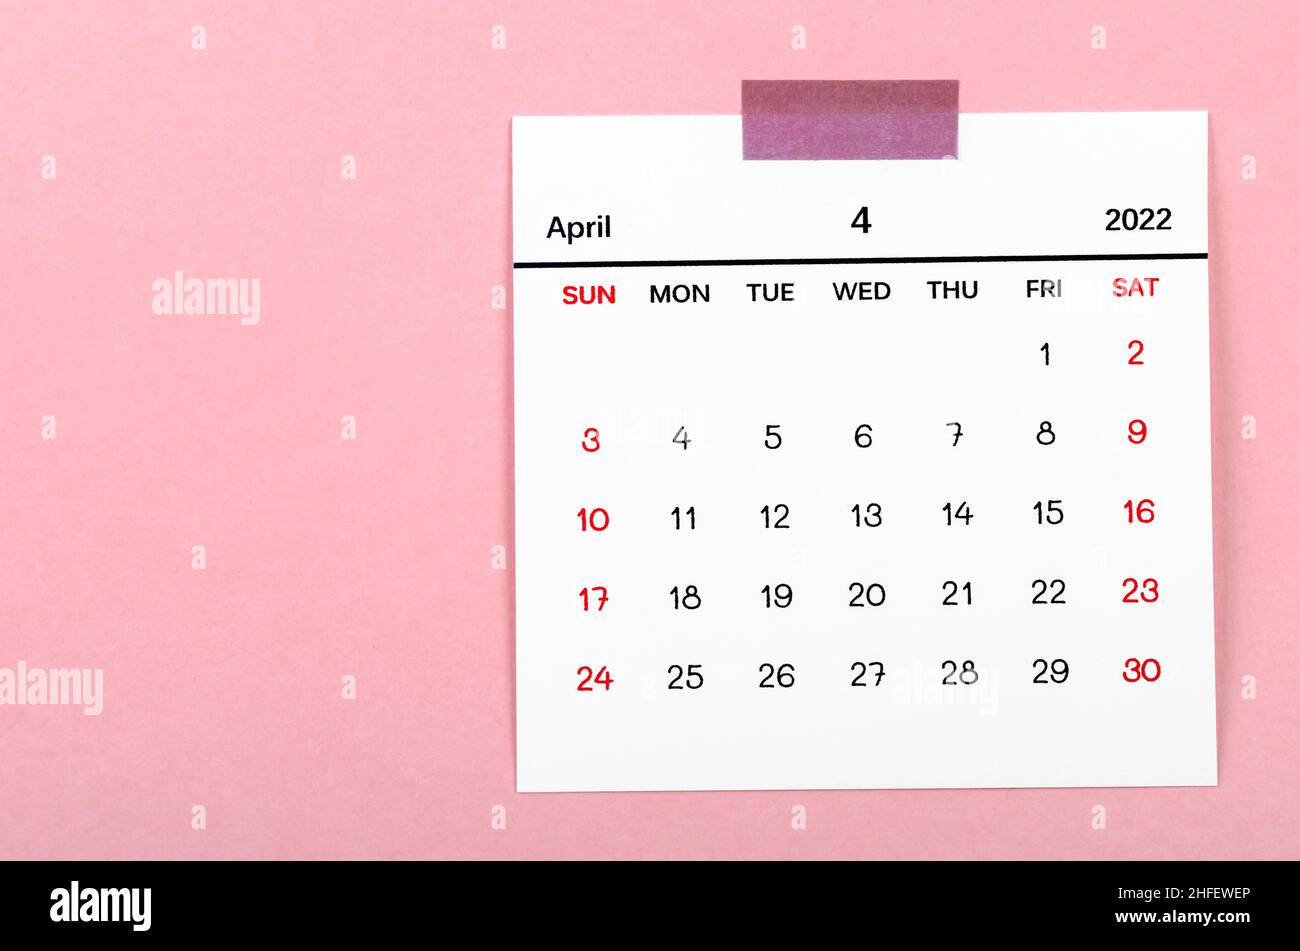 The April 2022 calendar on pink background. Stock Photo